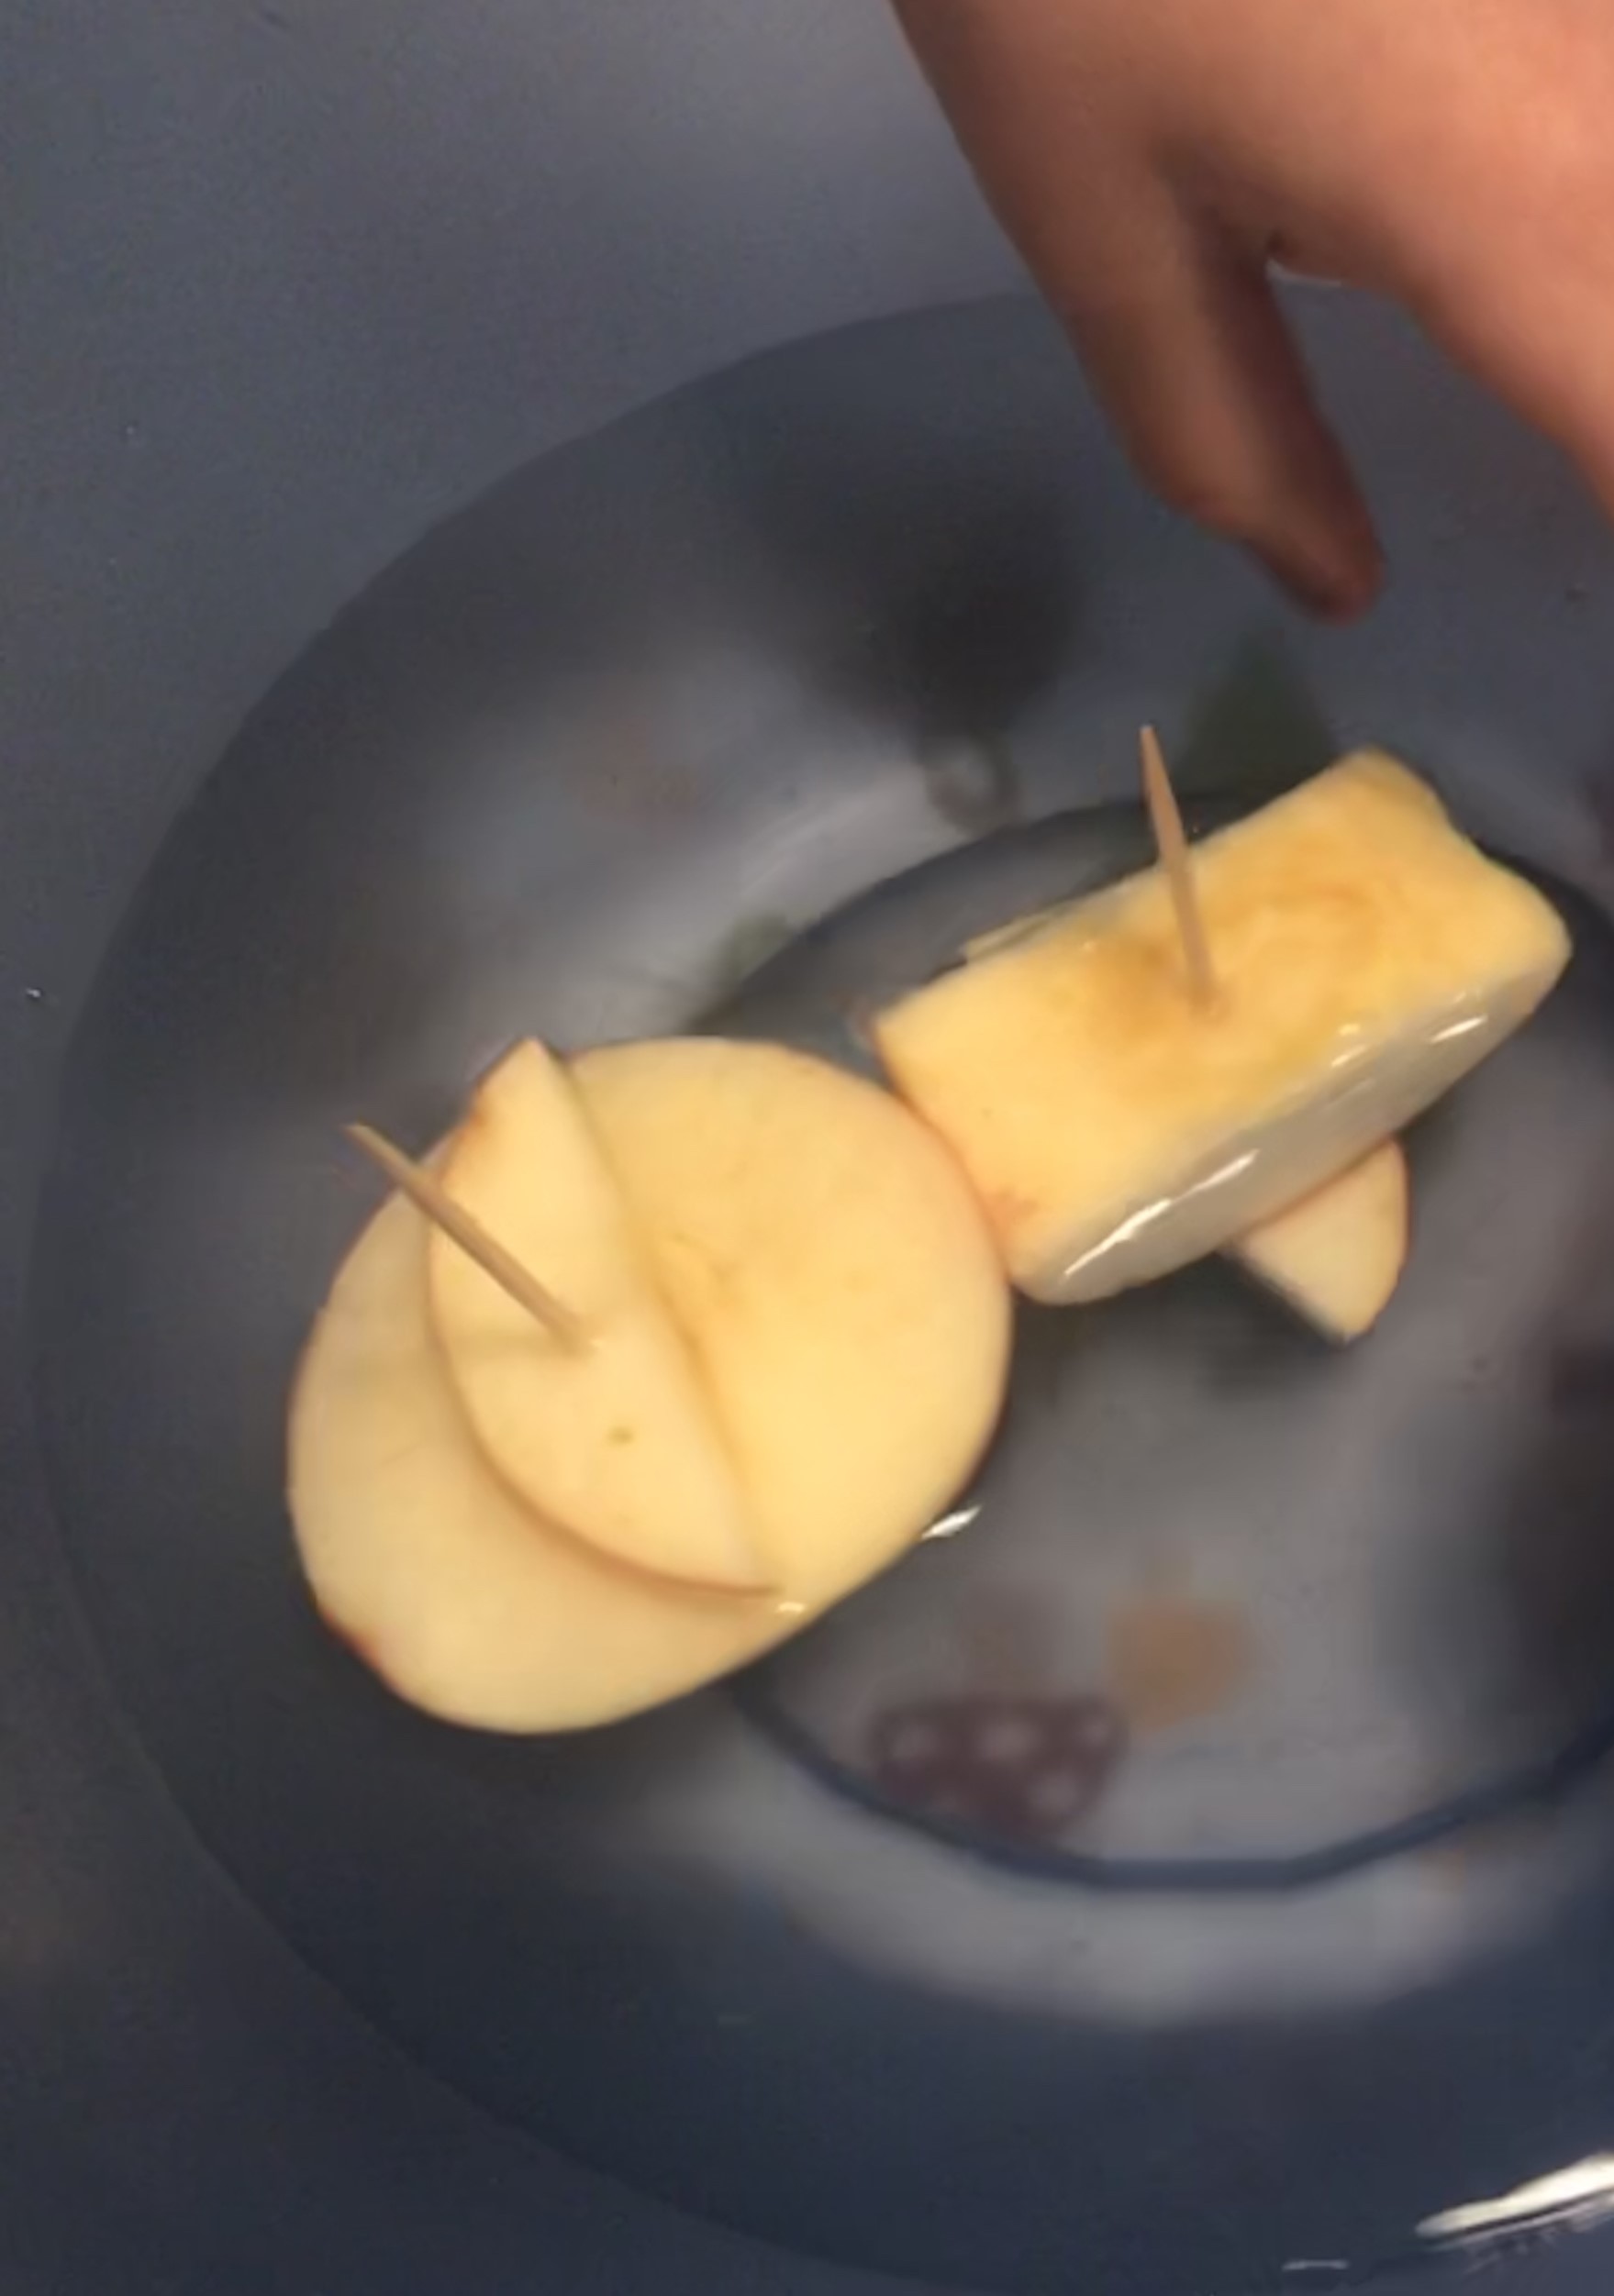 Small boats made of apple slices and toothpicks, float in a bowl of water.